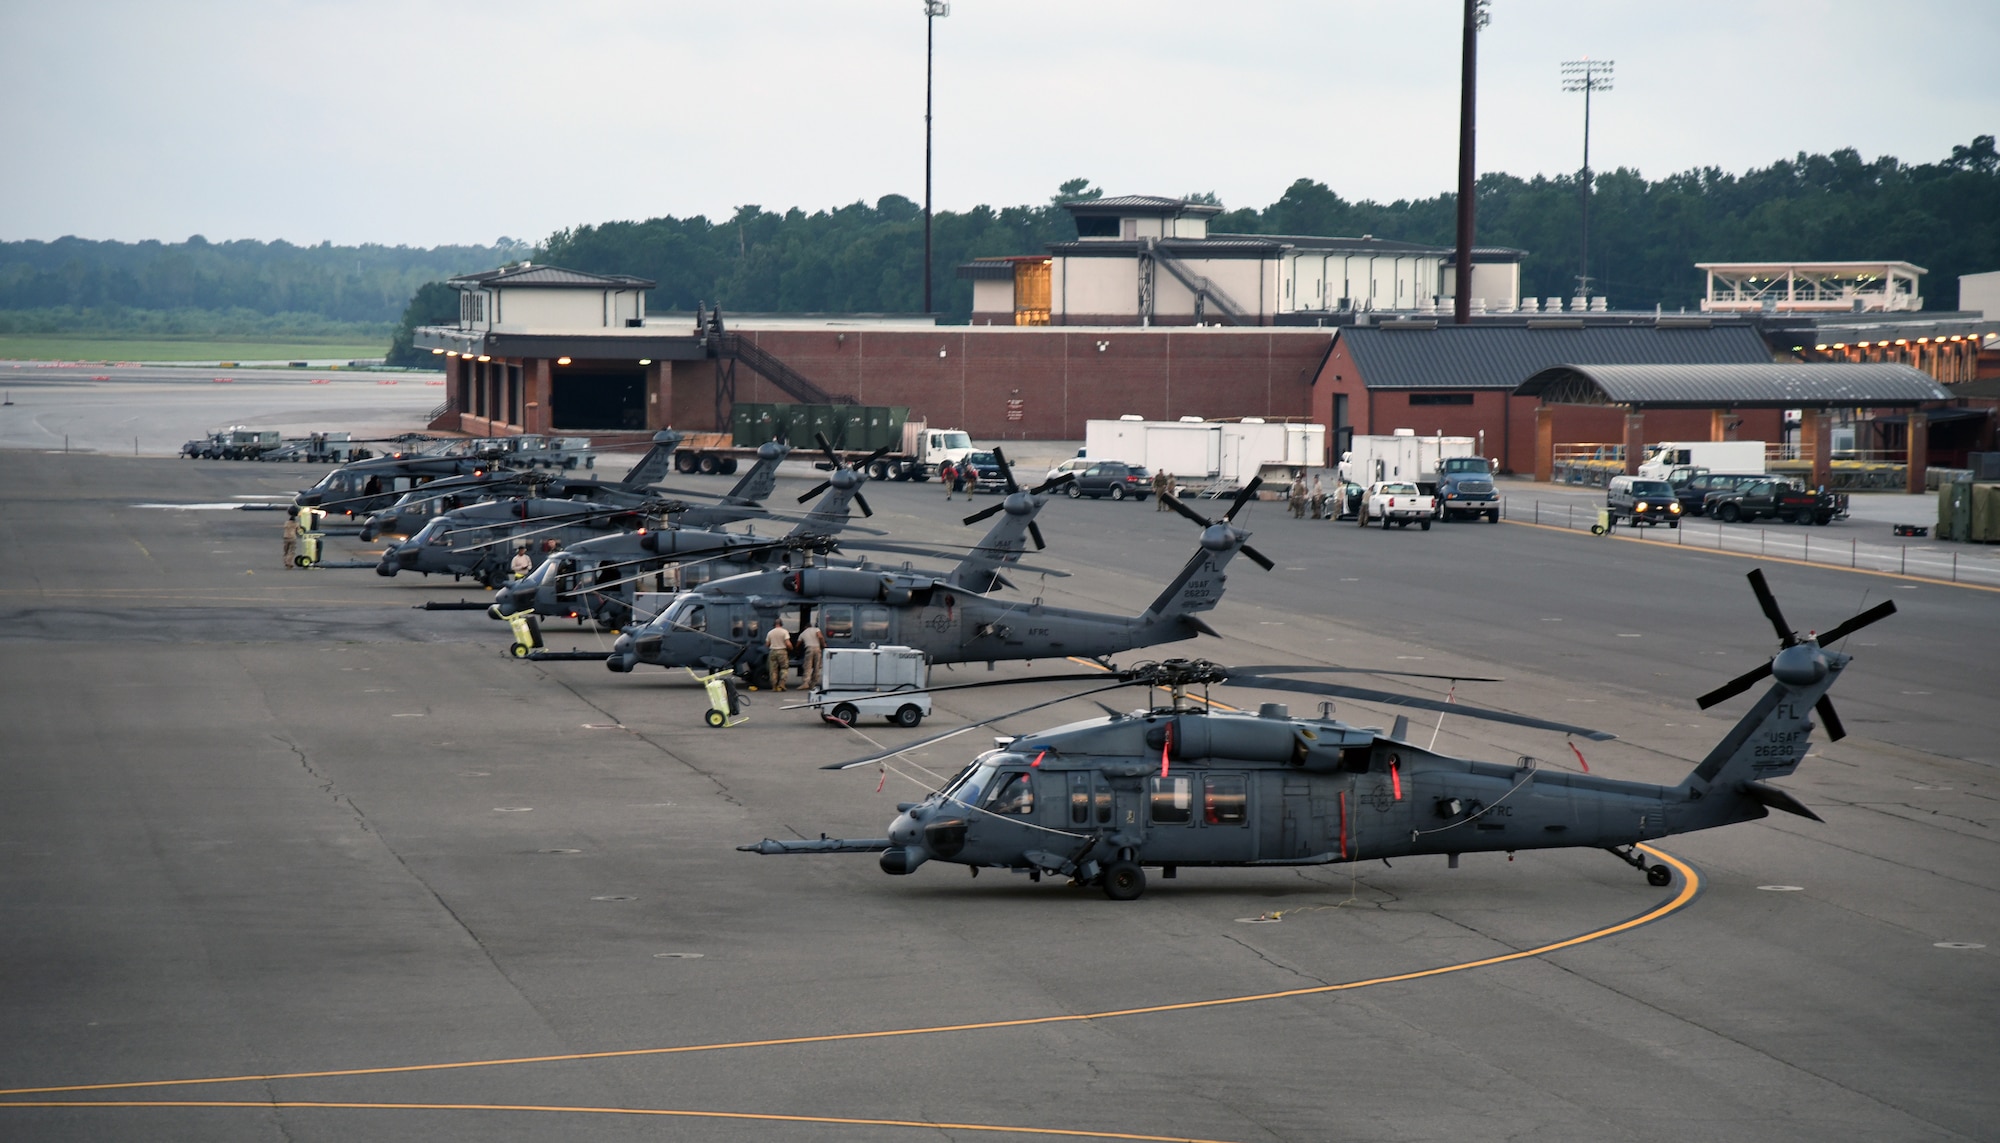 HH-60 Pave Hawk helicopter aircrew Airmen with the 334th Air Expeditionary Group, sit alert on the Joint Base Charleston, S.C.flightline Sept. 16, 2018. The 334th AEG is comprised of Airmen and assets from the 920th Rescue Wing (Patrick Air Force Base, Florida) and the 23d Wing (Moody Air Force Base, Georgia) which stand ready to provide search-and-rescue relief efforts in South Carolina to execute search and rescue operations for those who may be impacted by Hurricane Florence. (U.S. Air Force photo/Tech. Sgt. Kelly Goonan)